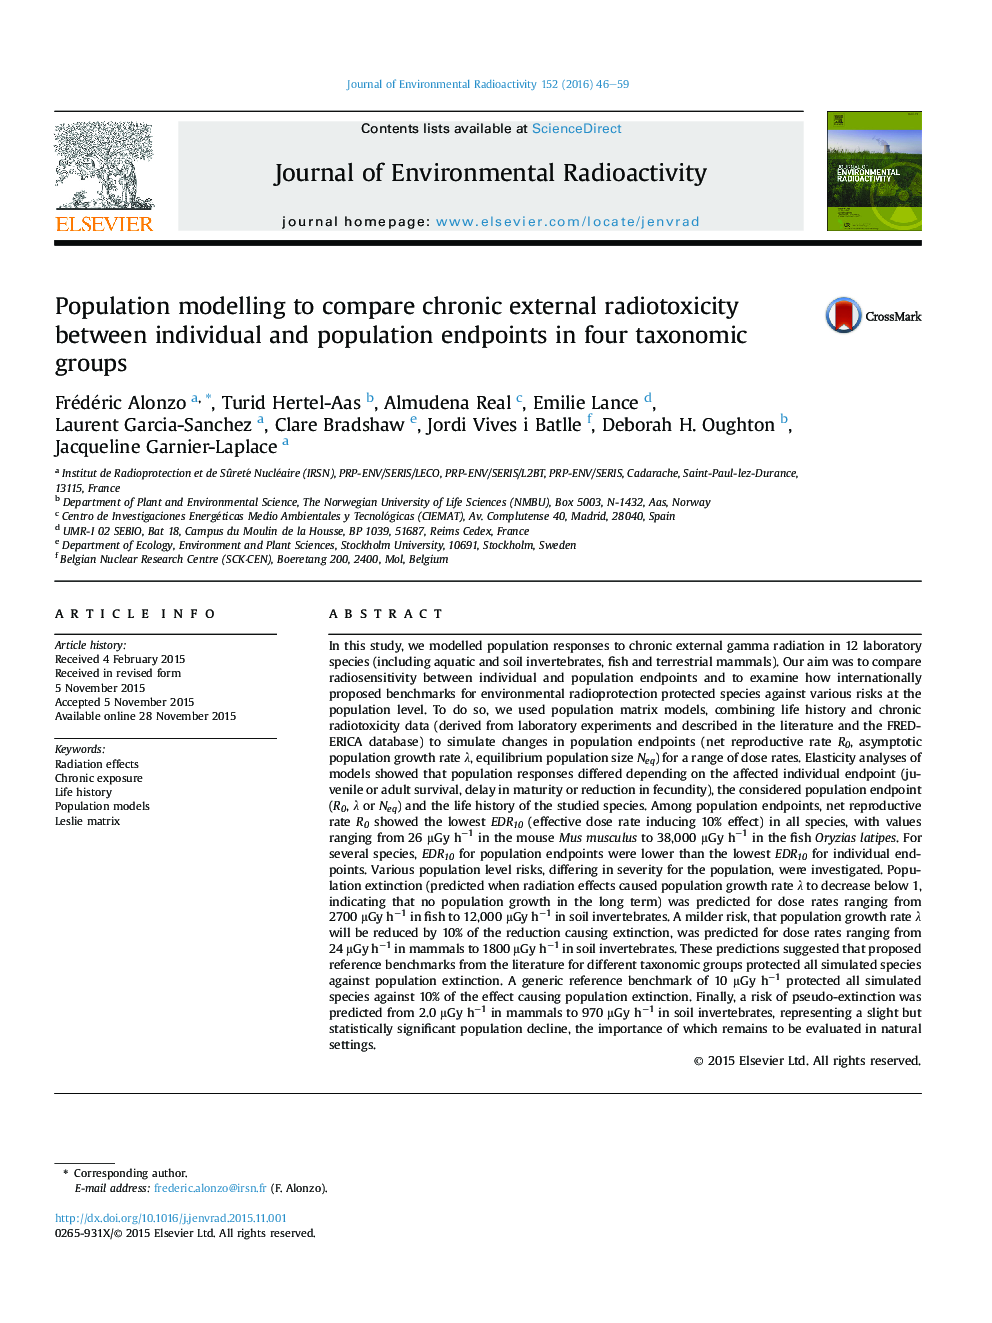 Population modelling to compare chronic external radiotoxicity between individual and population endpoints in four taxonomic groups